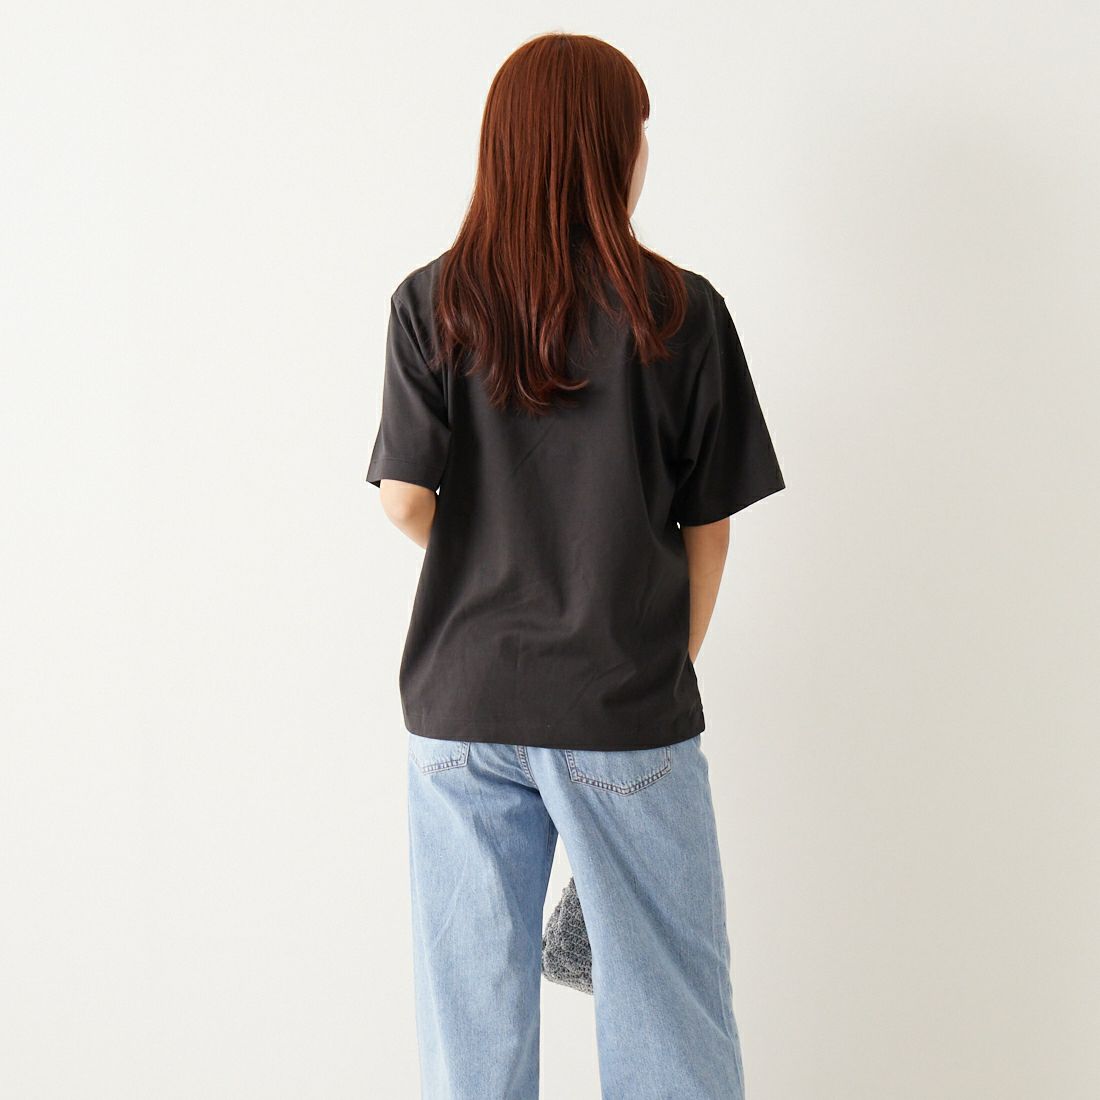 blurhms ROOTSTOCK [ブラームス ルーツストック] スタンダードプリントTシャツ [BROOTS24S33A] 02 INK BLK &&モデル身長：167cm 着用サイズ：0&&